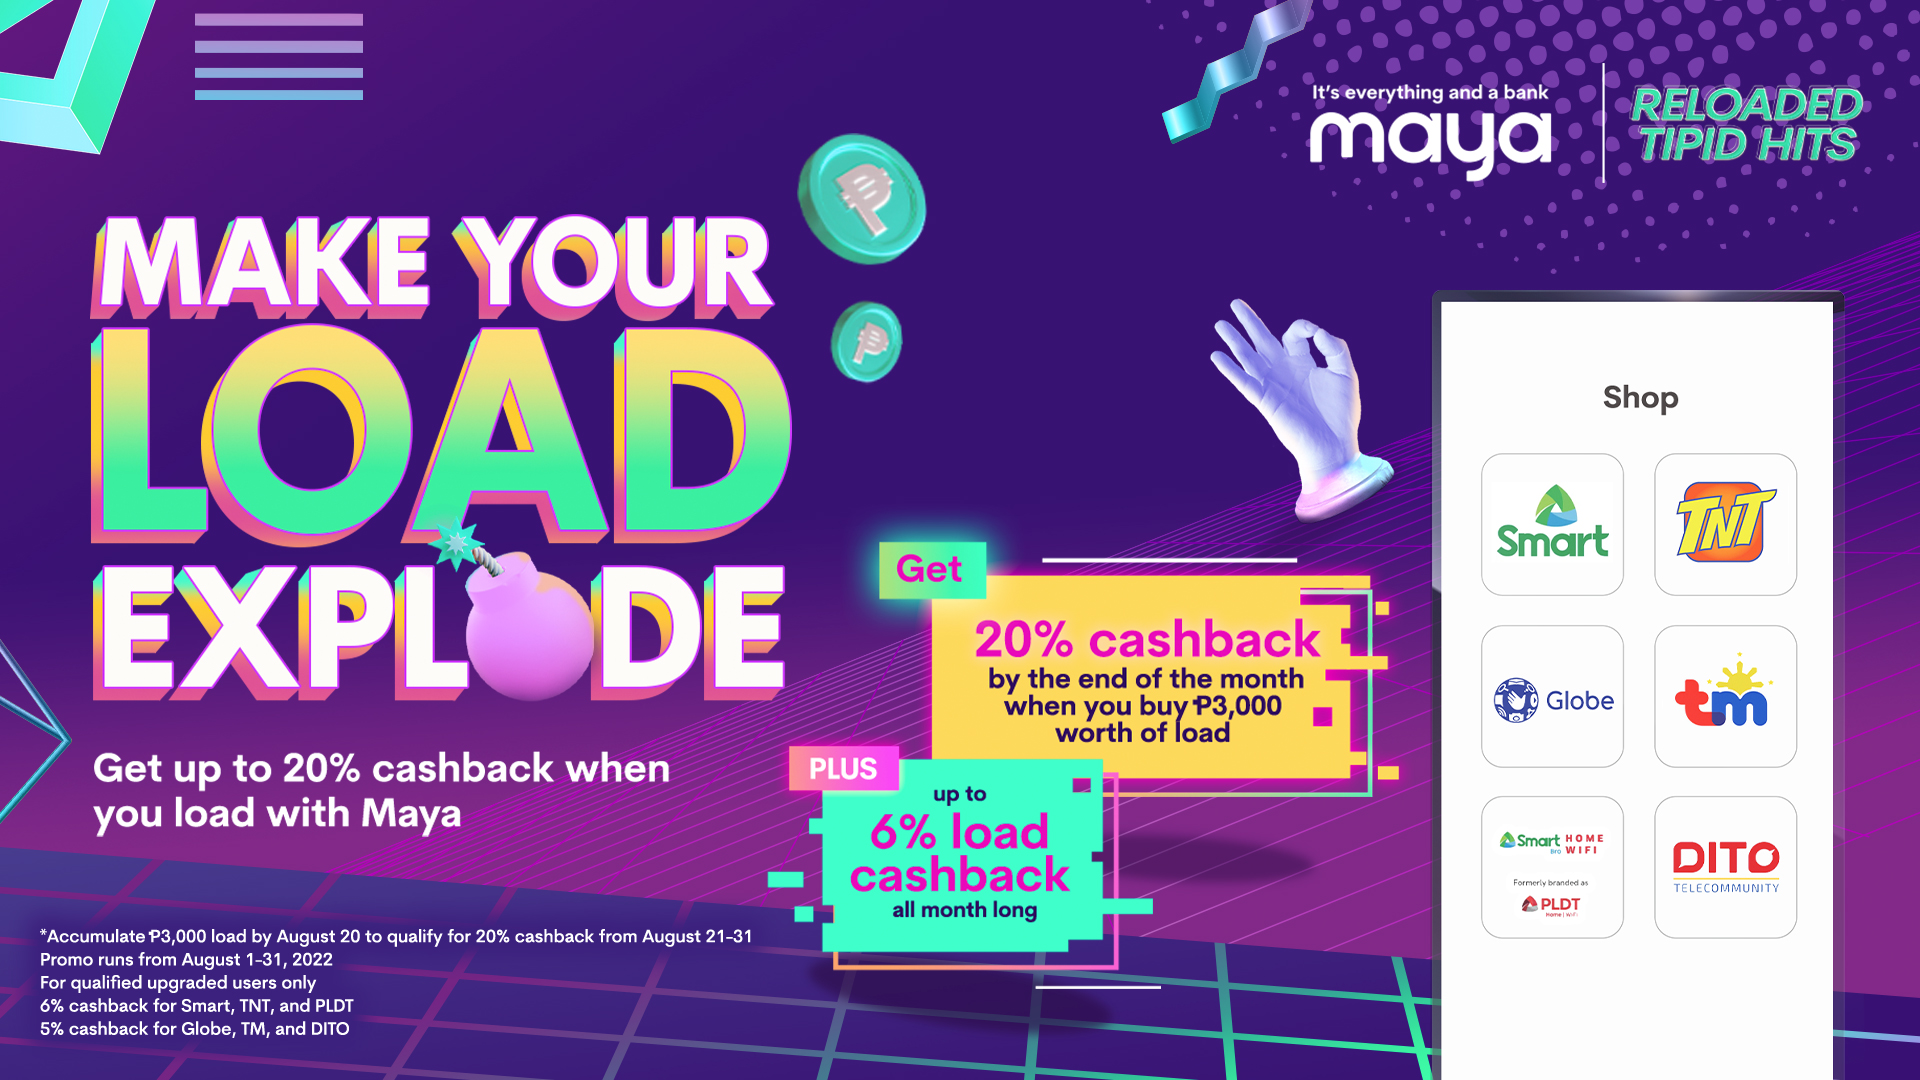 Enjoy UNLI cashback when you buy load with Maya in August!